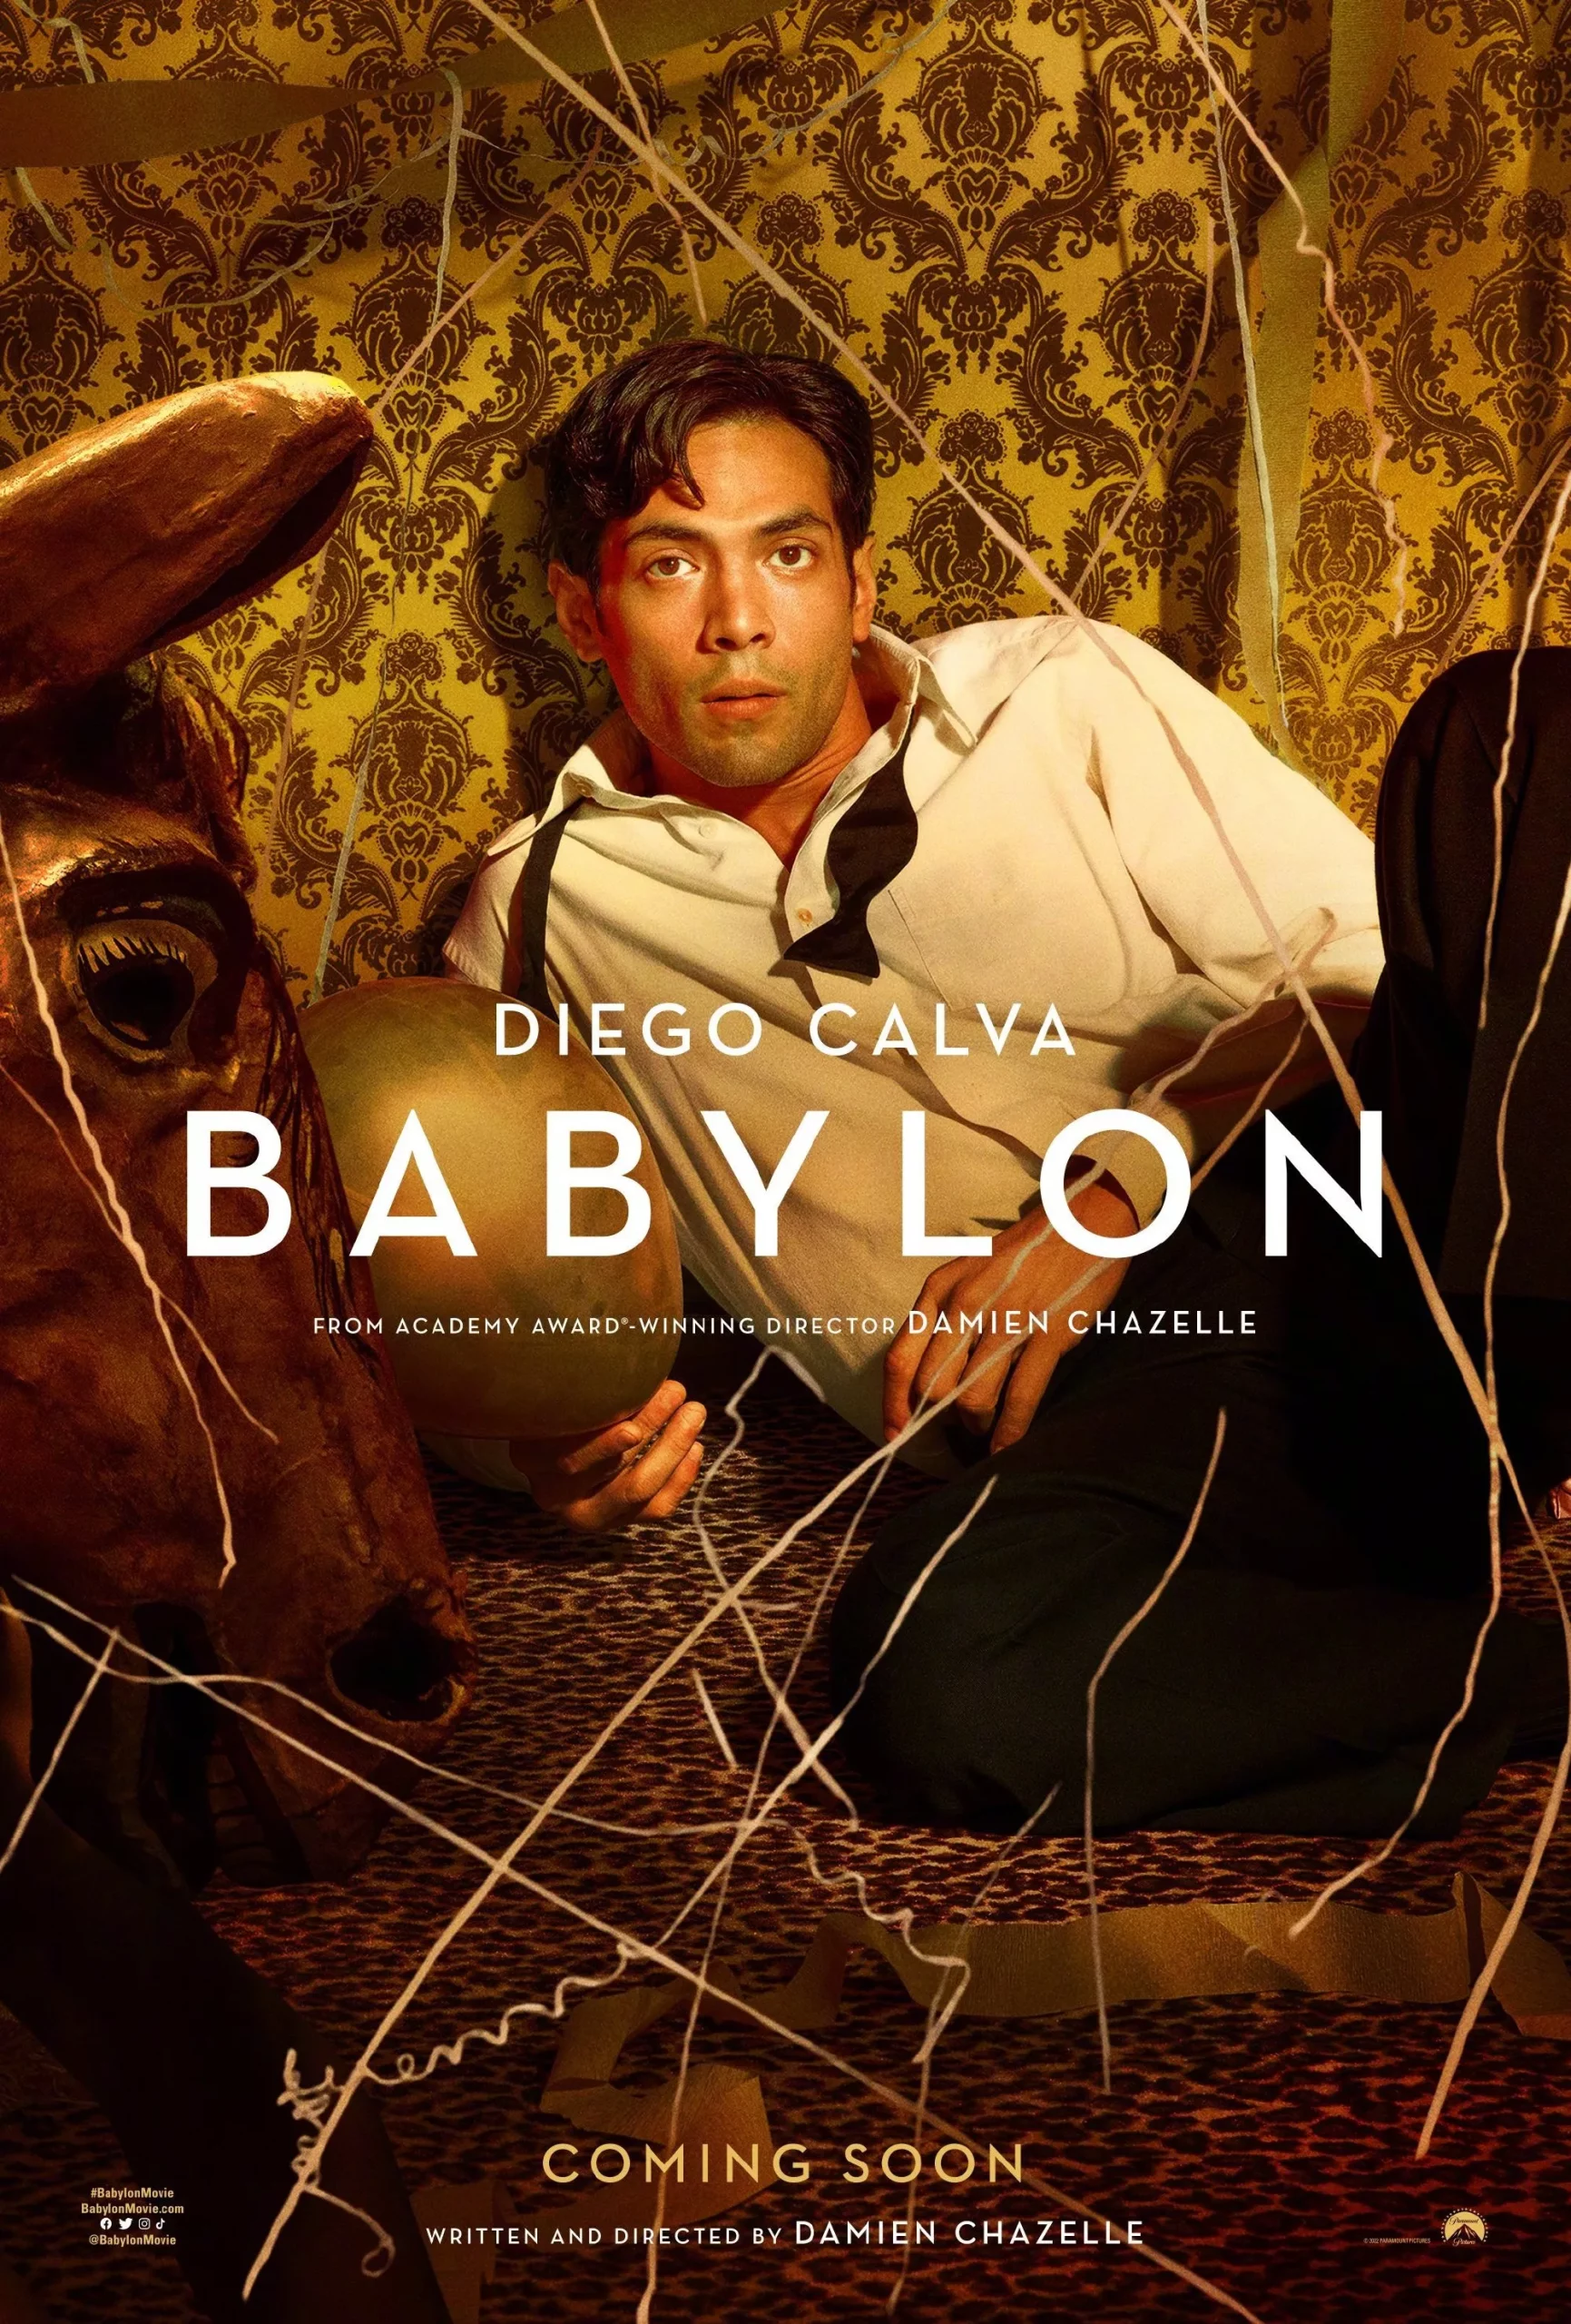 damien-chazelles-new-film-babylon-releases-character-posters-3